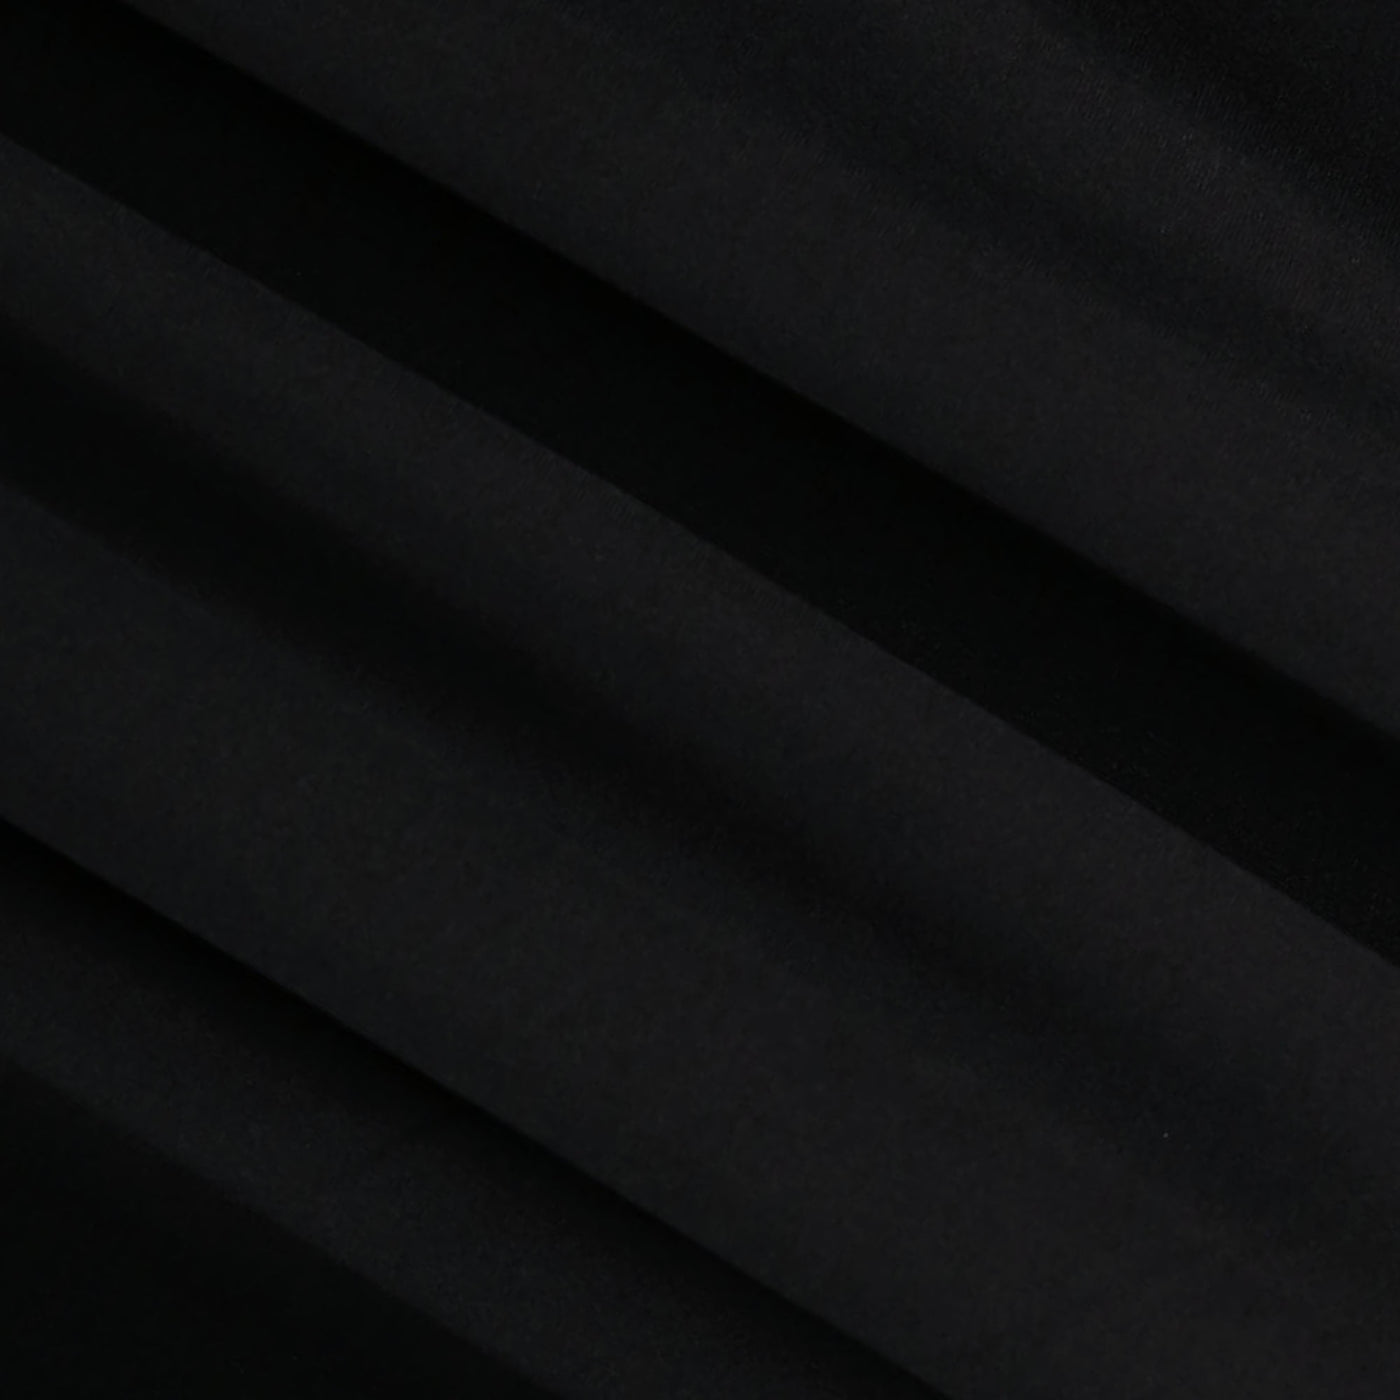 FabricLA | DTY Double Brushed Polyester Spandex Knit Fabric | Sold by the Yard | Shorts, pants, sleeveless blouses, T-shirts | Black - FabricLA.com